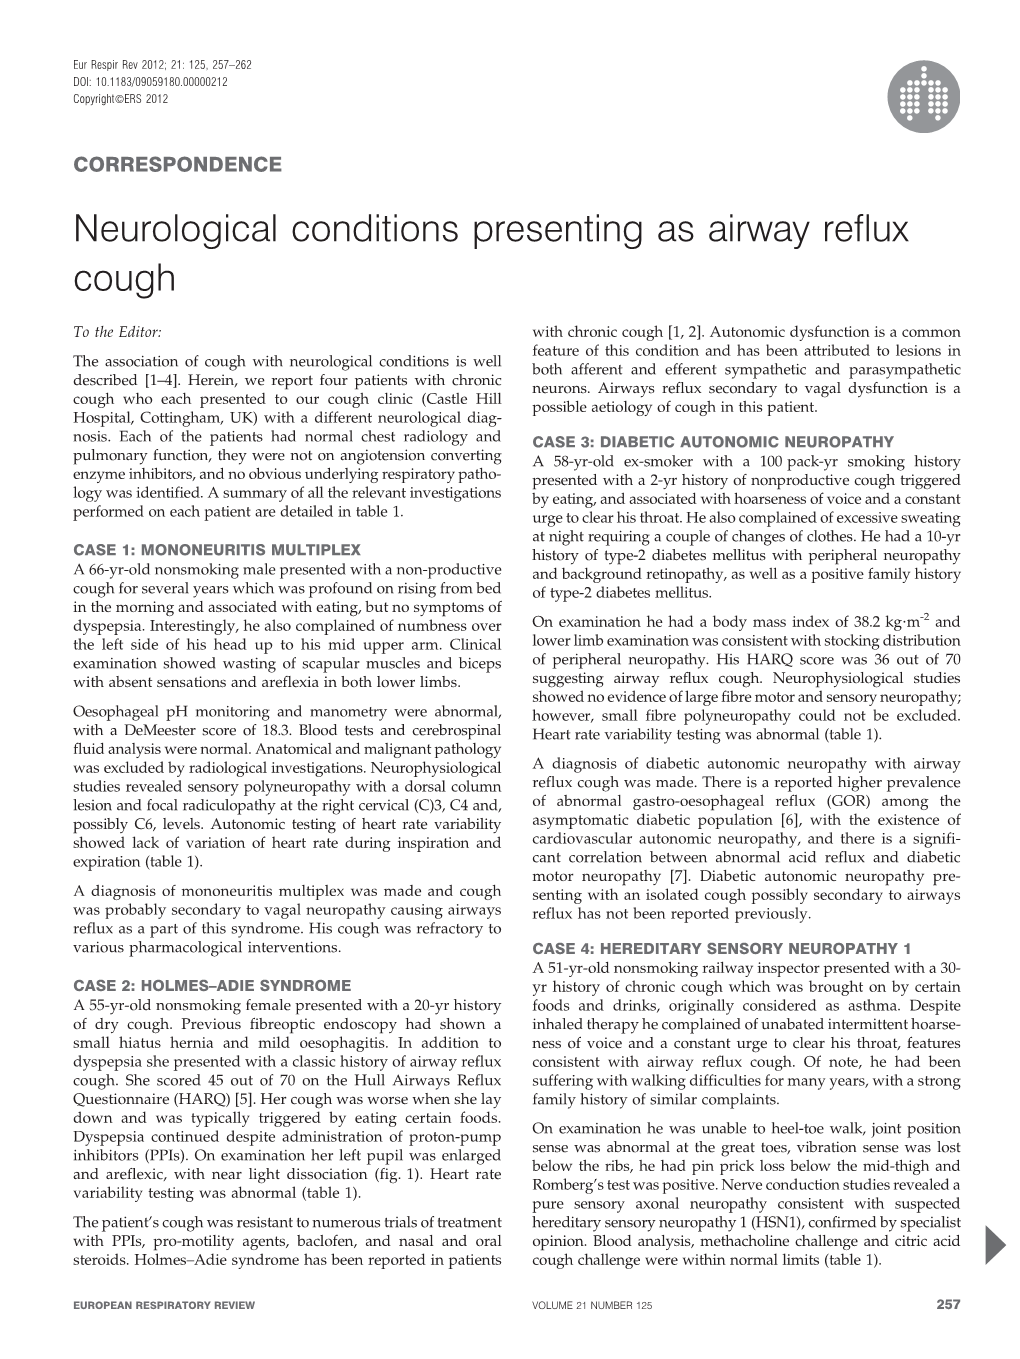 Neurological Conditions Presenting As Airway Reflux Cough